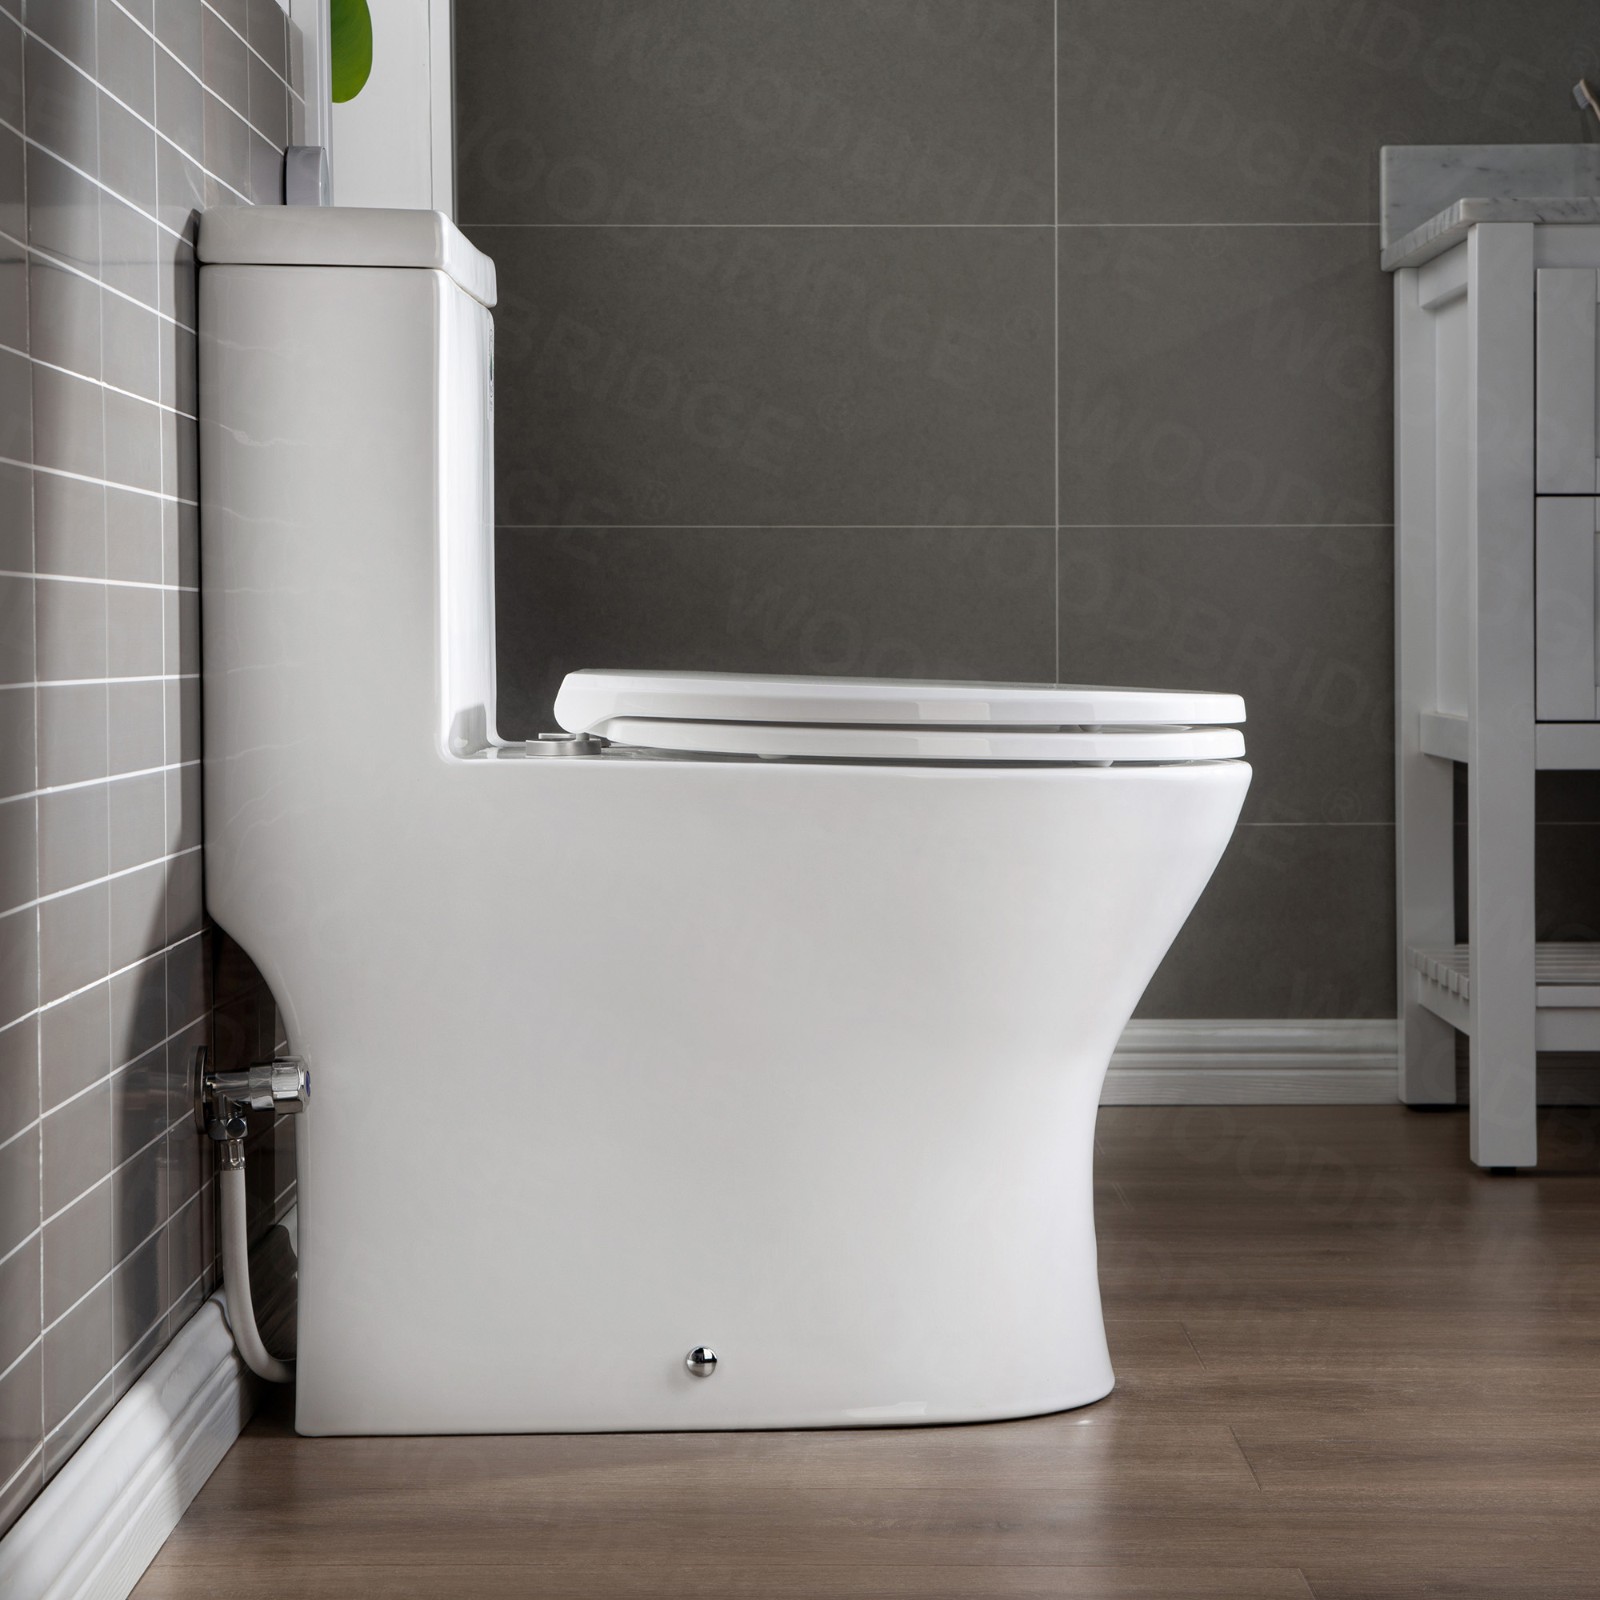  WOODBRIDGE One Piece Short Compact Bathroom Tiny Mini Commode Water Closet Dual Flush Concealed Trapway, Brushed Nickel Button B0500-B/N, White_5687